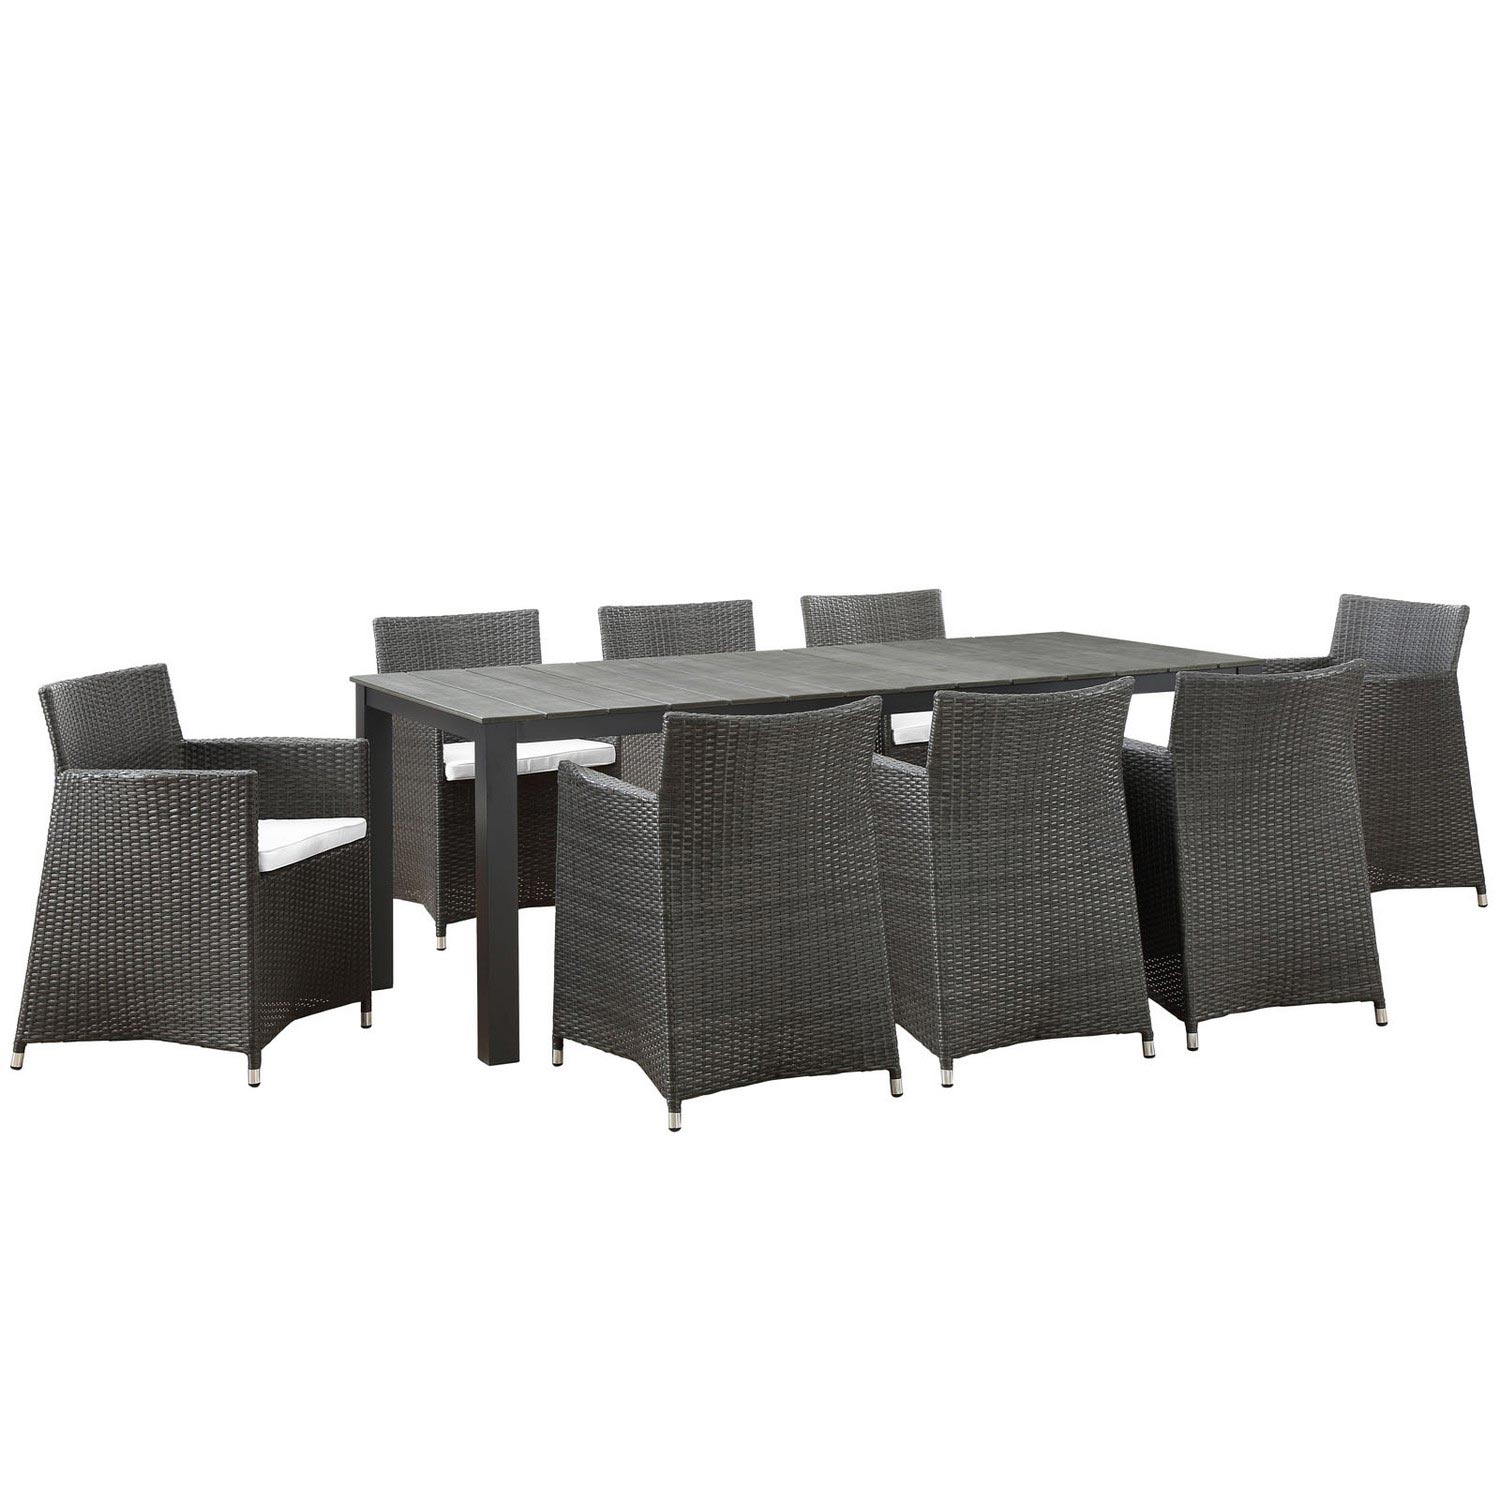 Modway Junction 9 Piece Outdoor Patio Dining Set - Brown/White